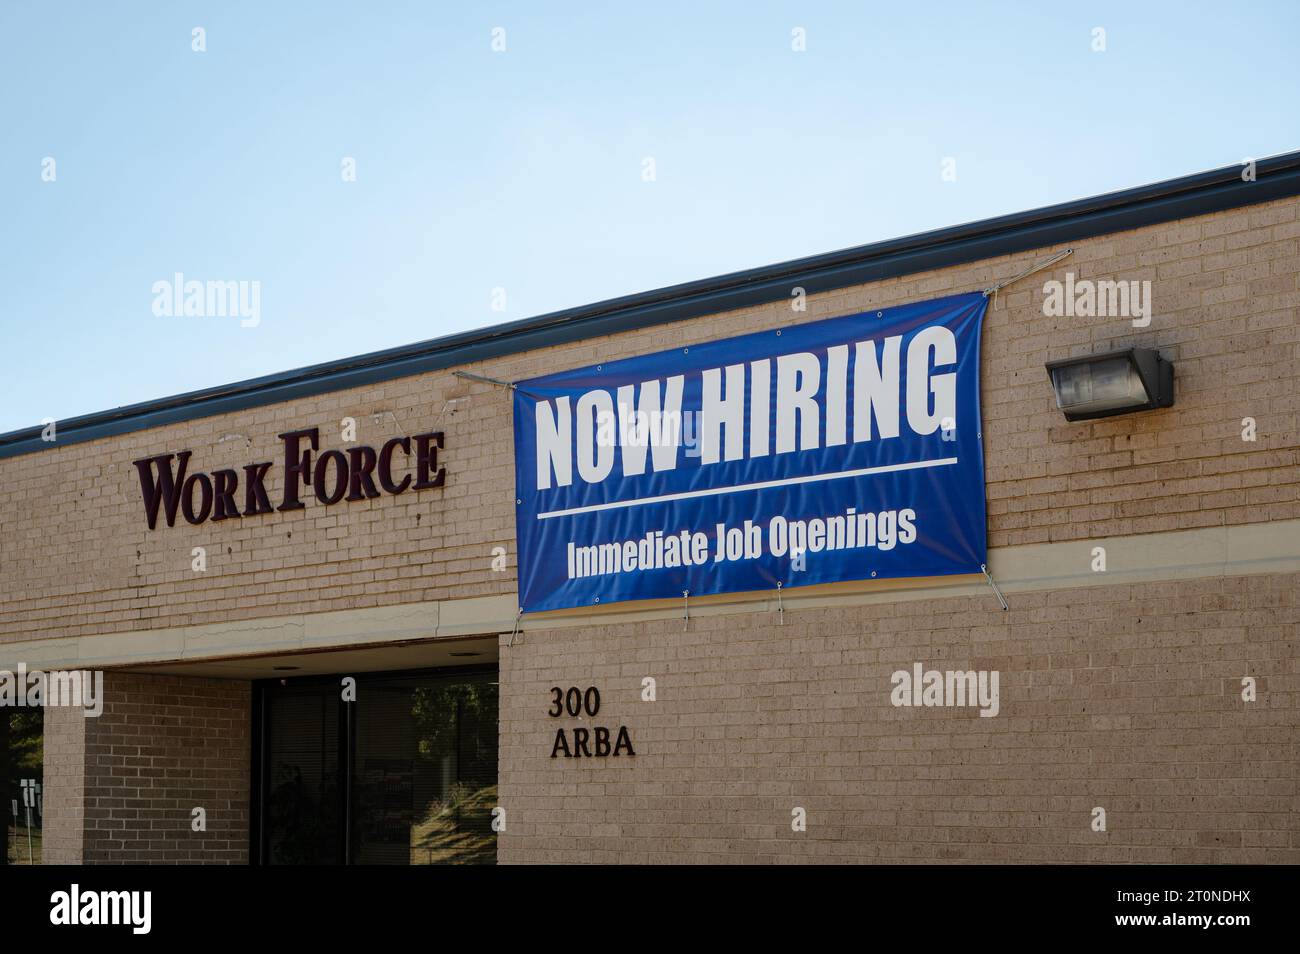 Now hiring, immediate job openings sign hanging at a WorkForce employment office in Montgomery Alabama, USA. Stock Photo